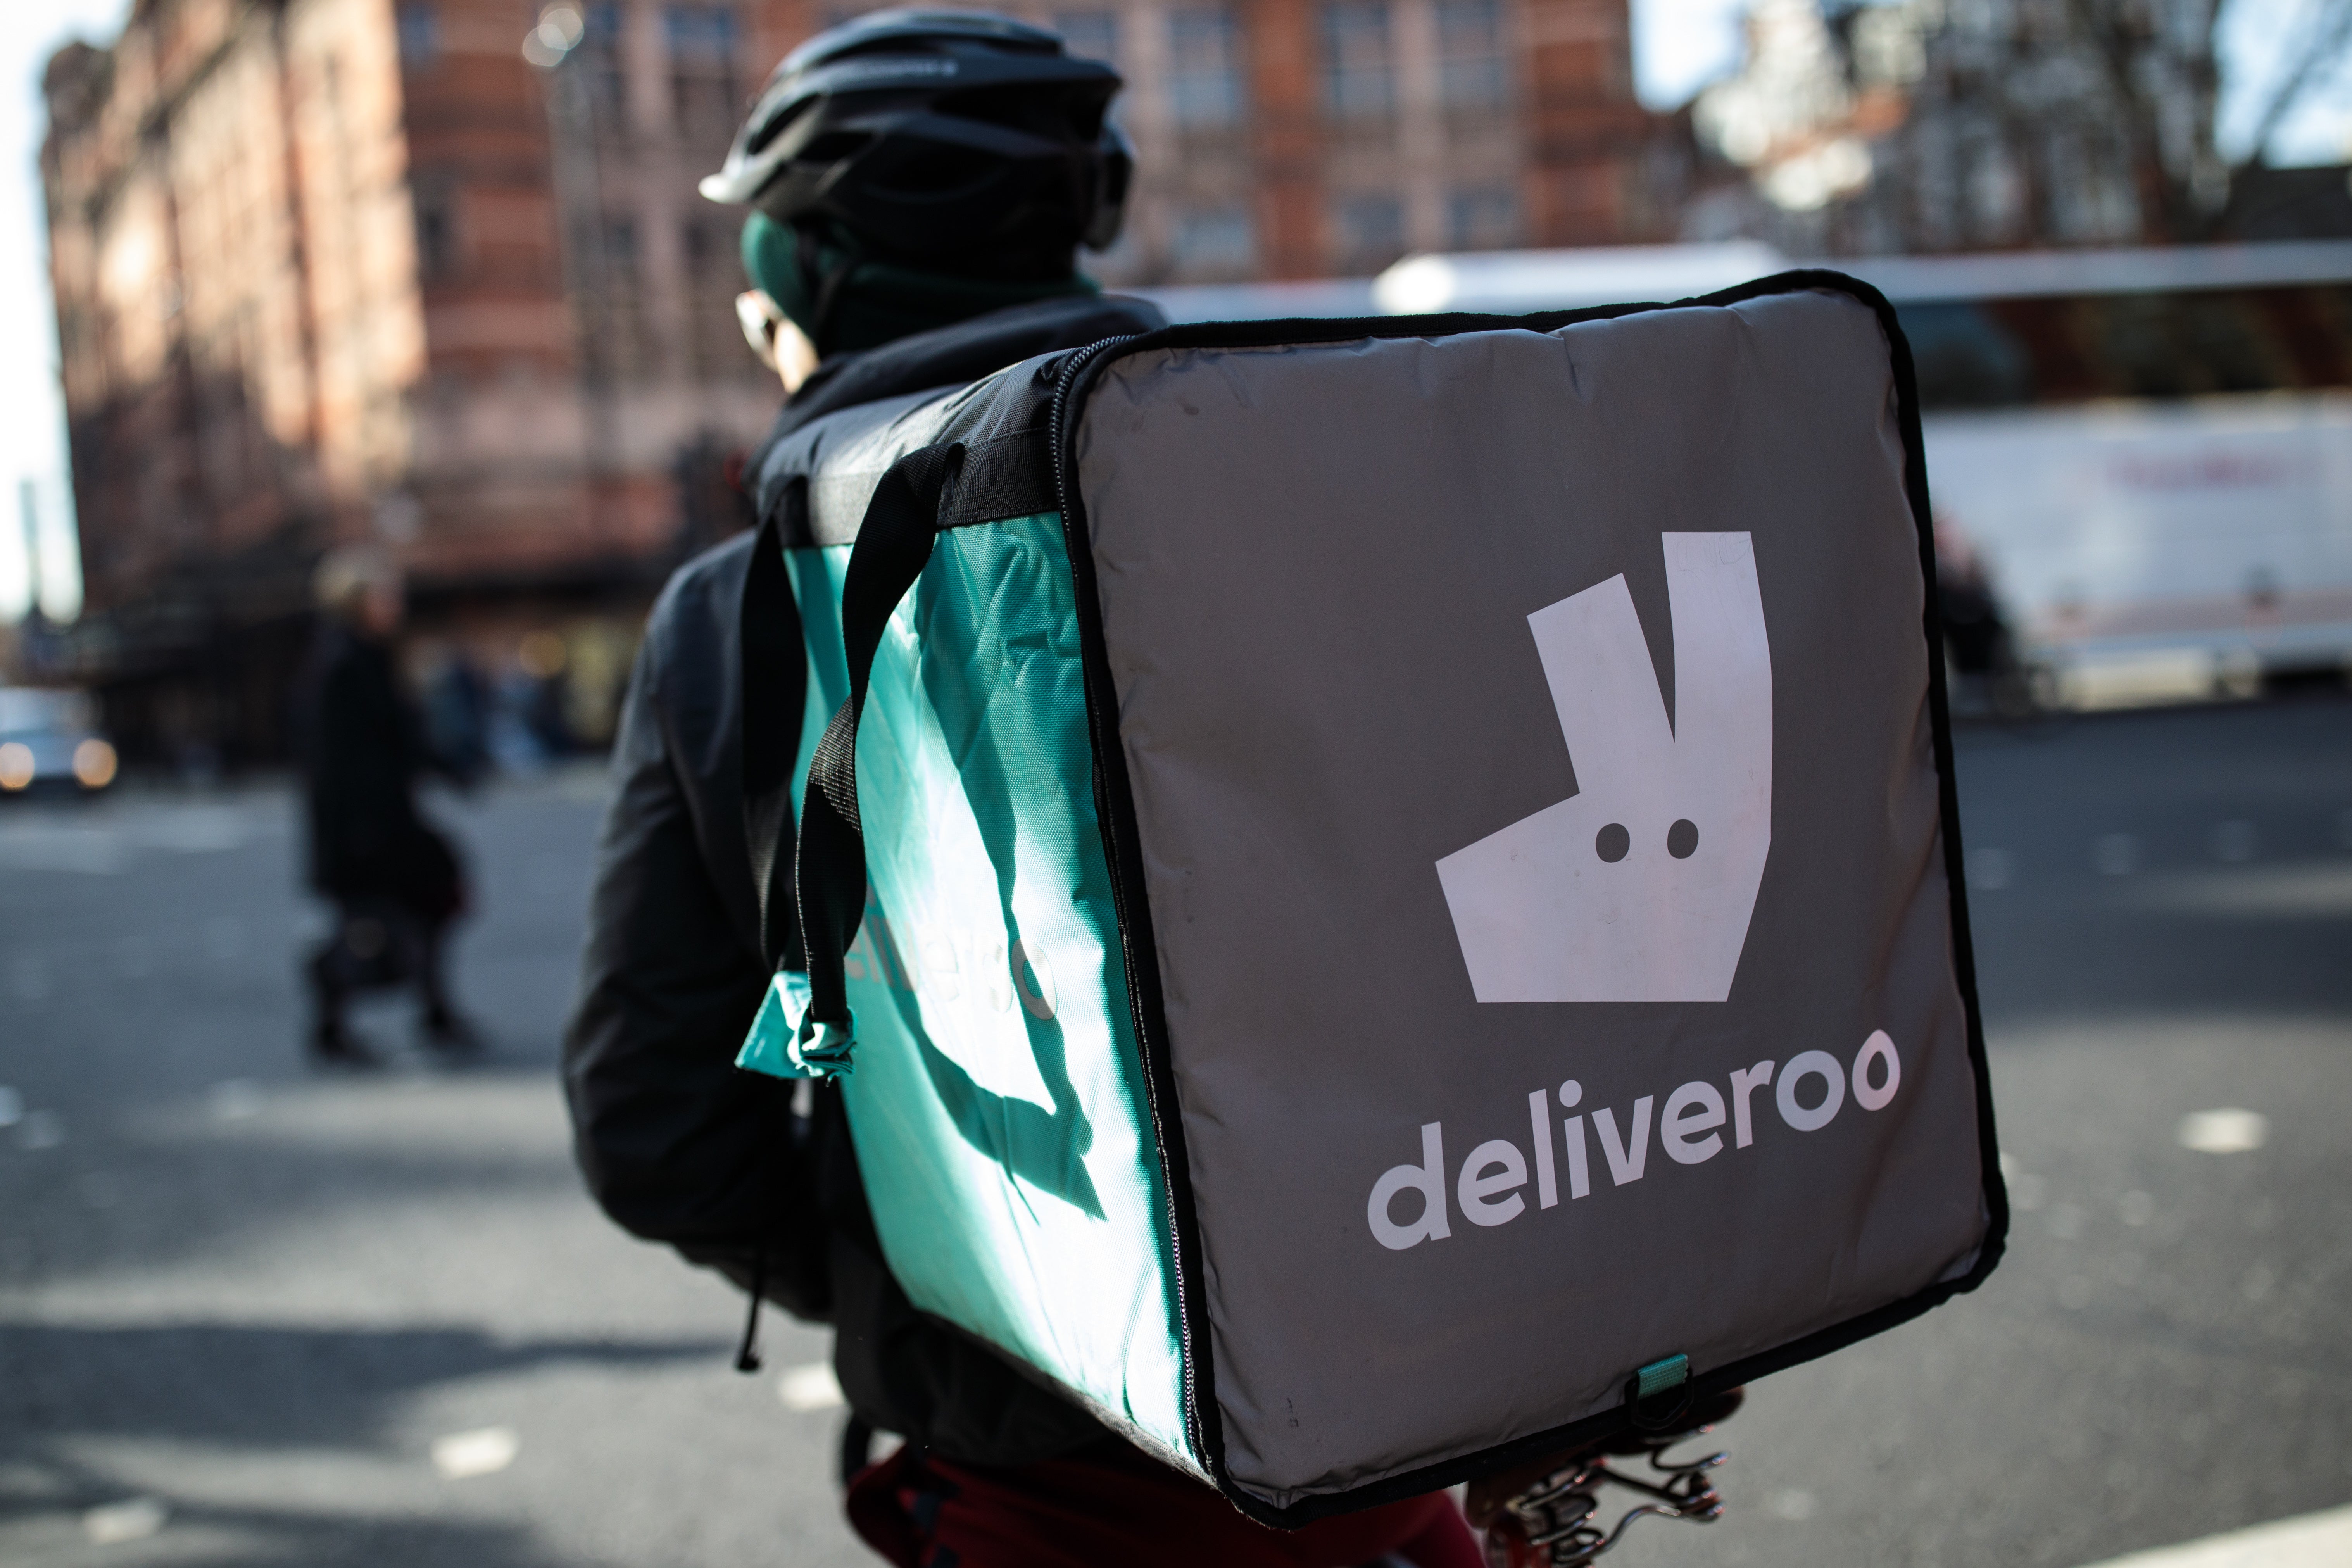 The treatment of its freelance riders who deliver meals is under the spotlight